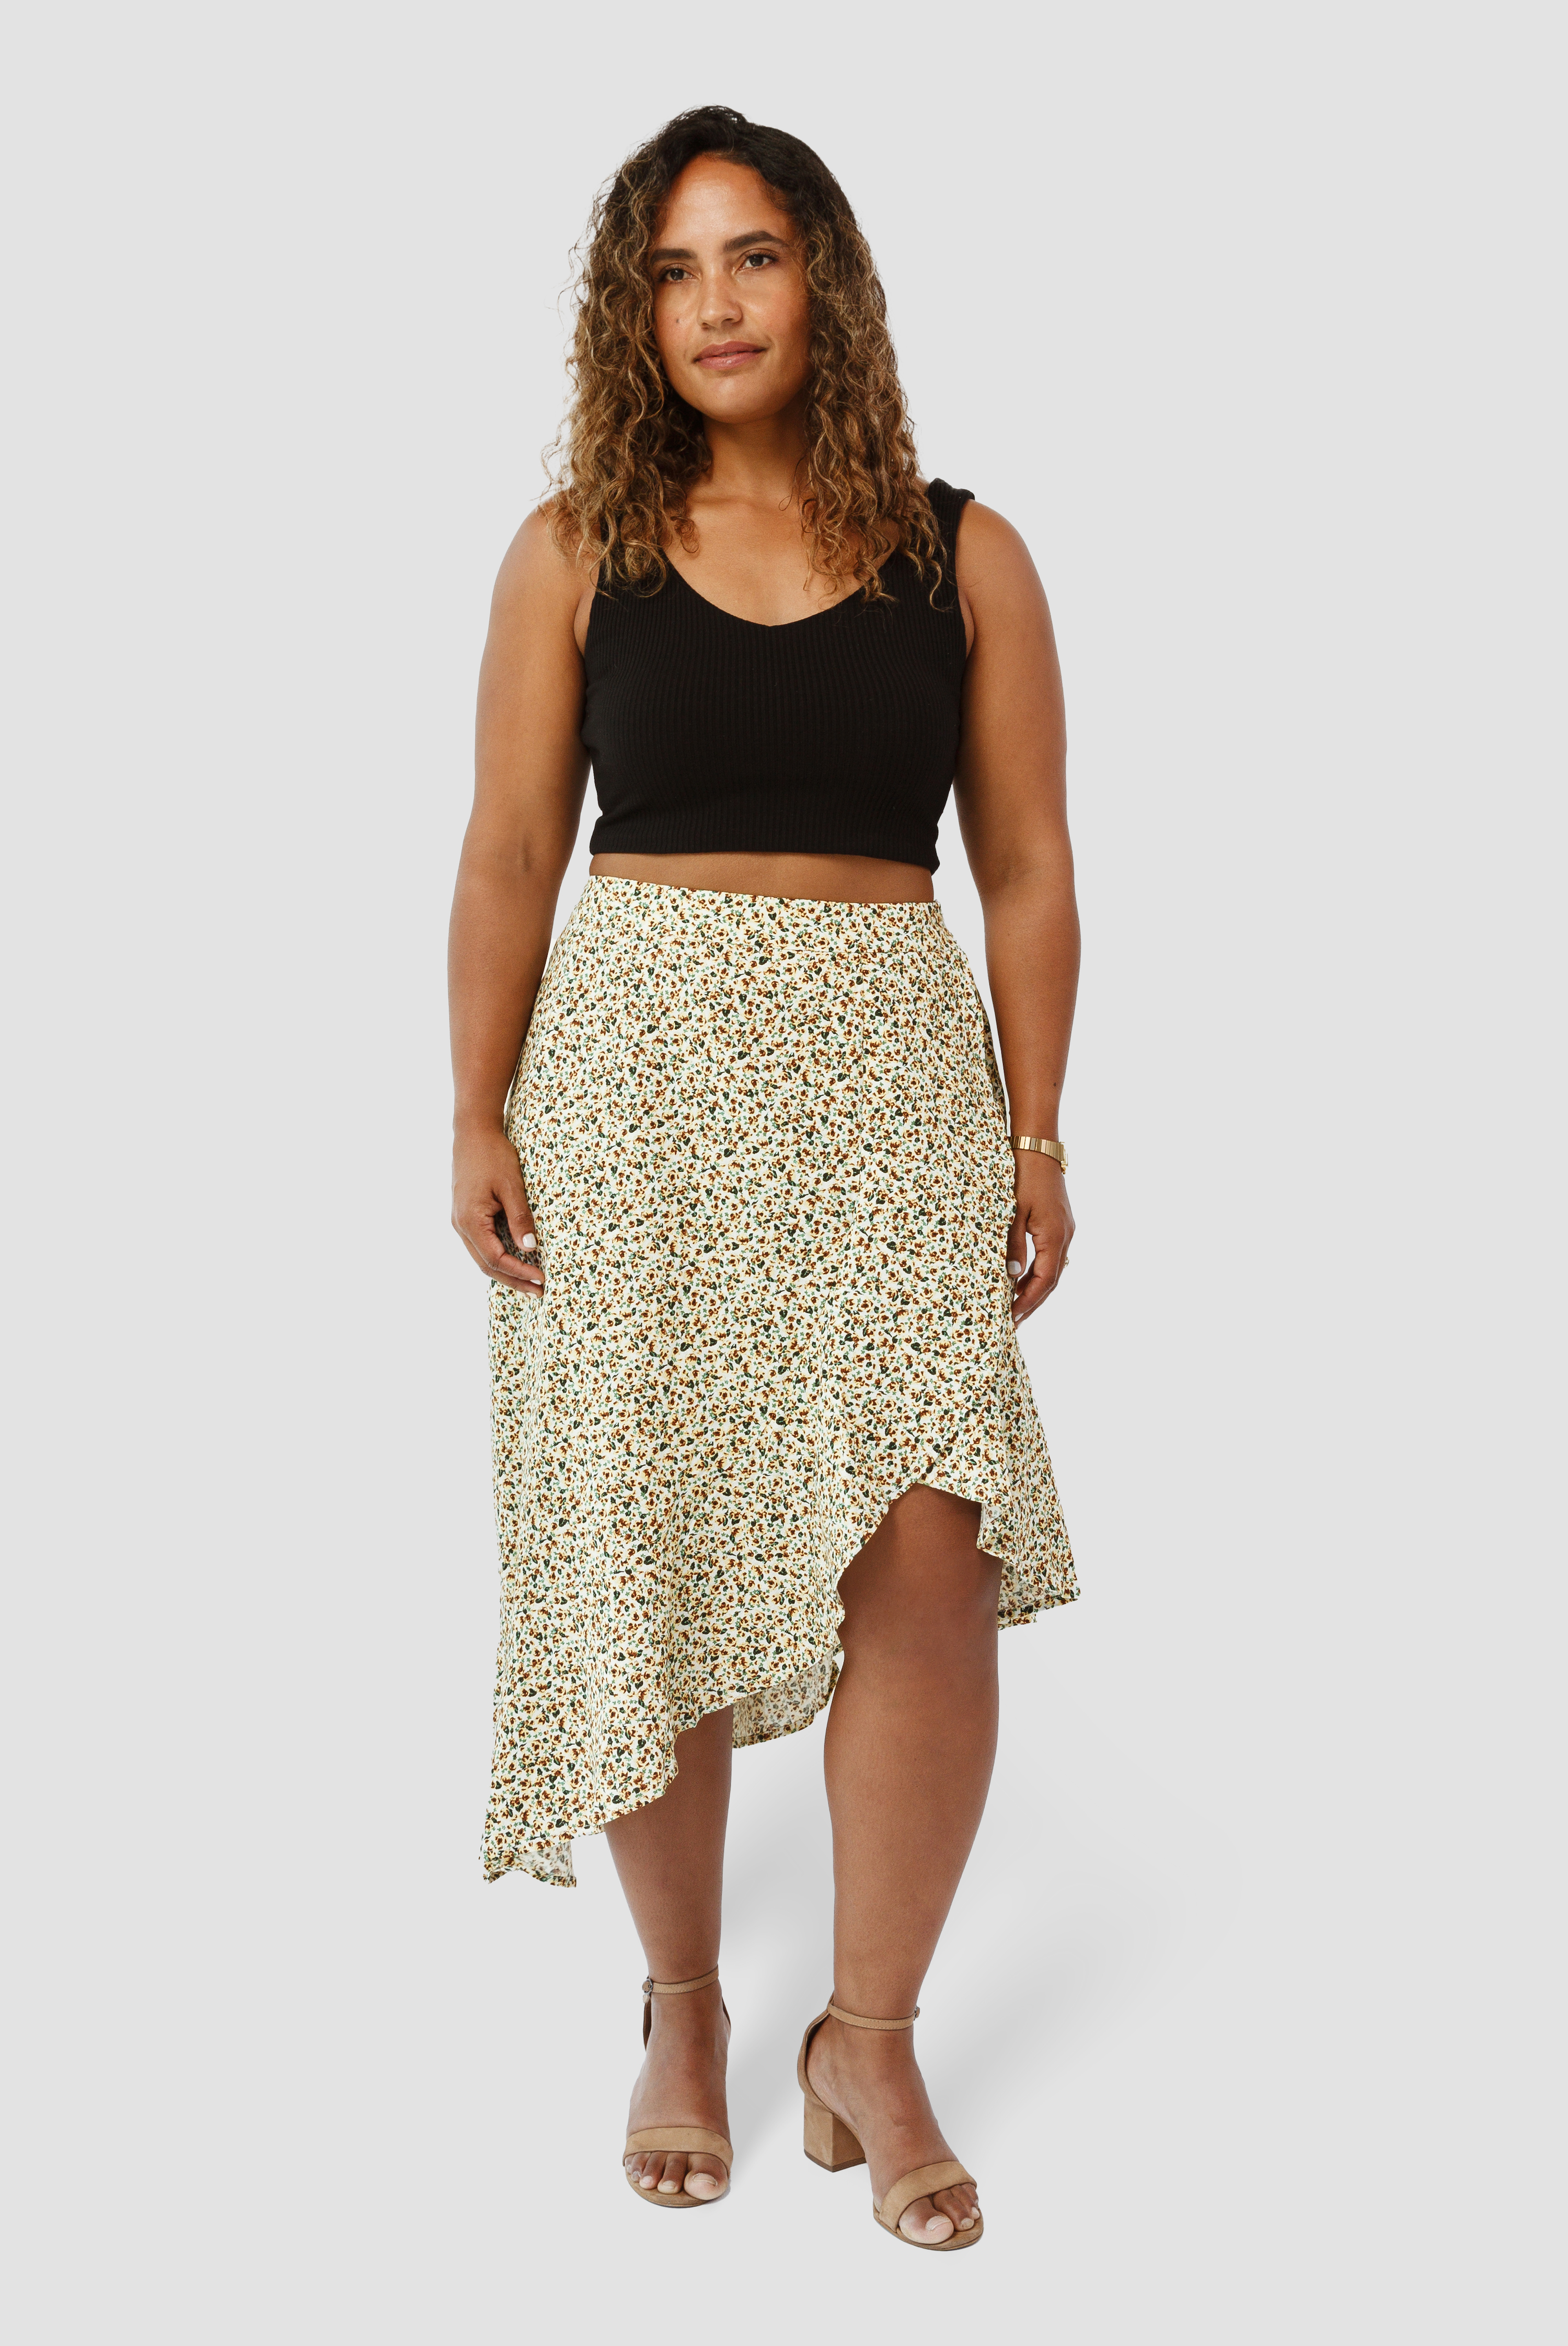 The Cascade Skirt by Aam is a universally flattering midi skirt. It sits high at the waist with more room for full hips and thighs. Shown here is the front view on a model who is 5'3